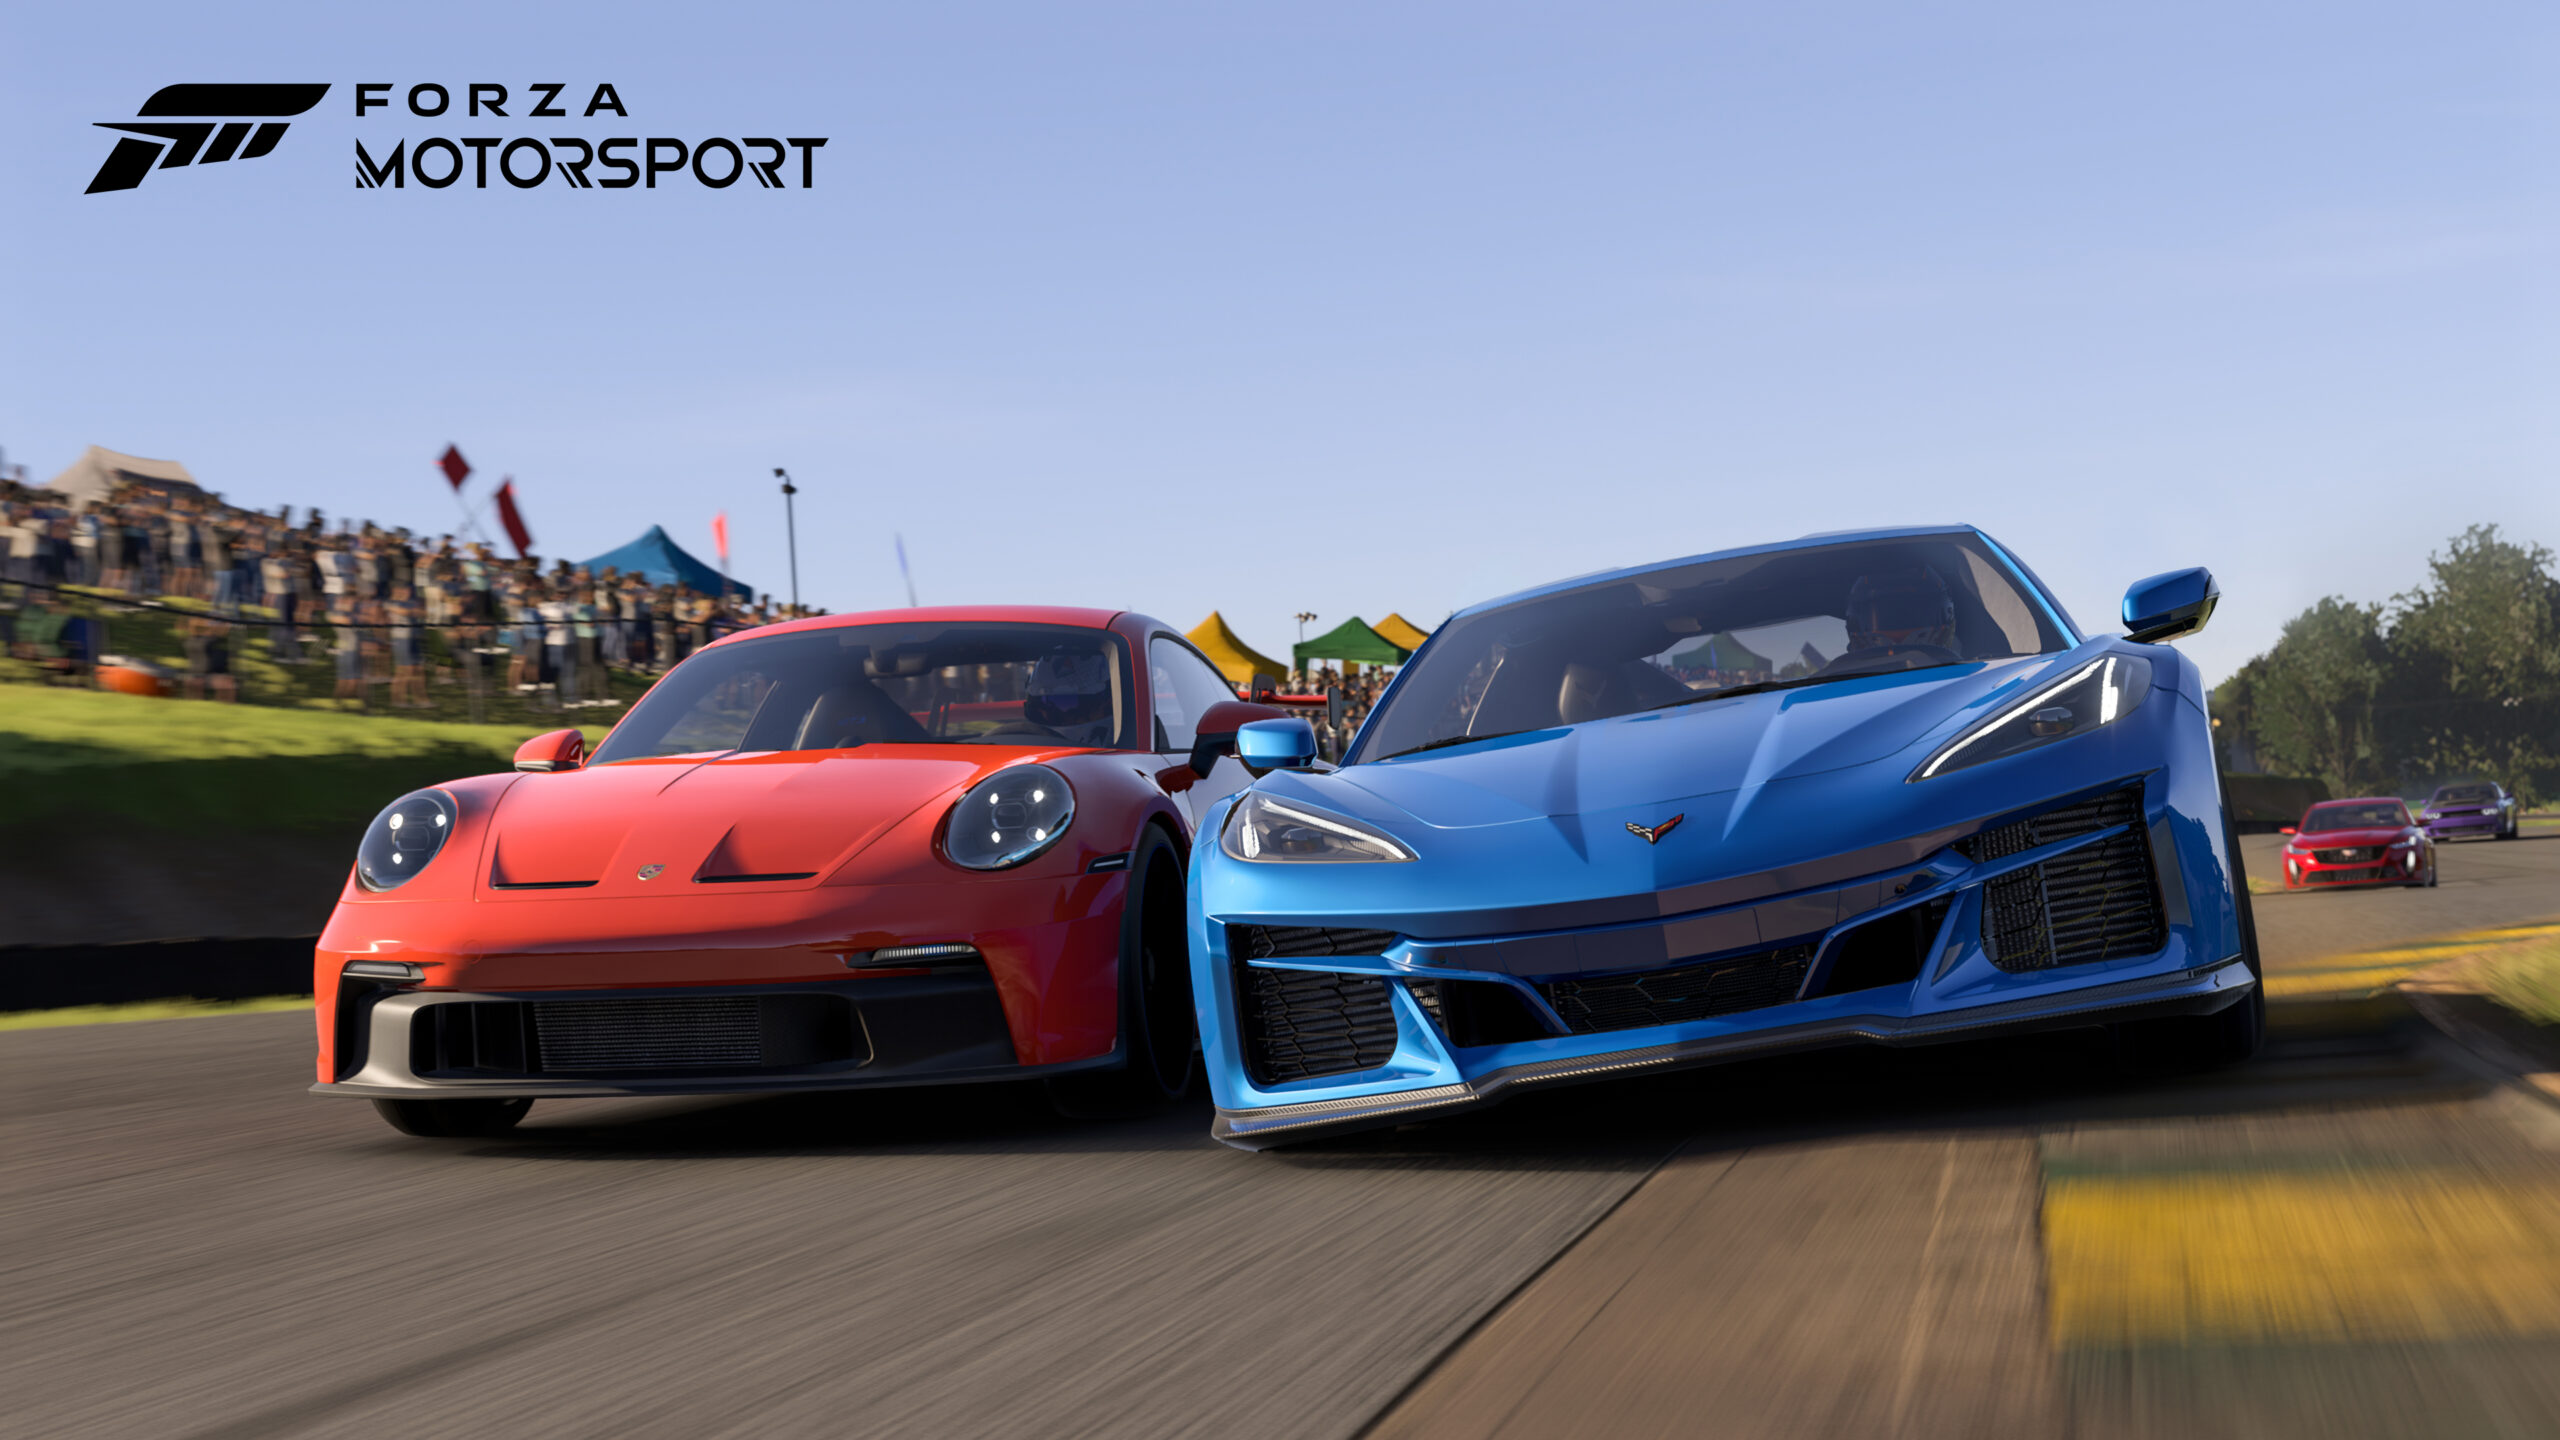 New Forza Motorsport: Everything You Need to Know